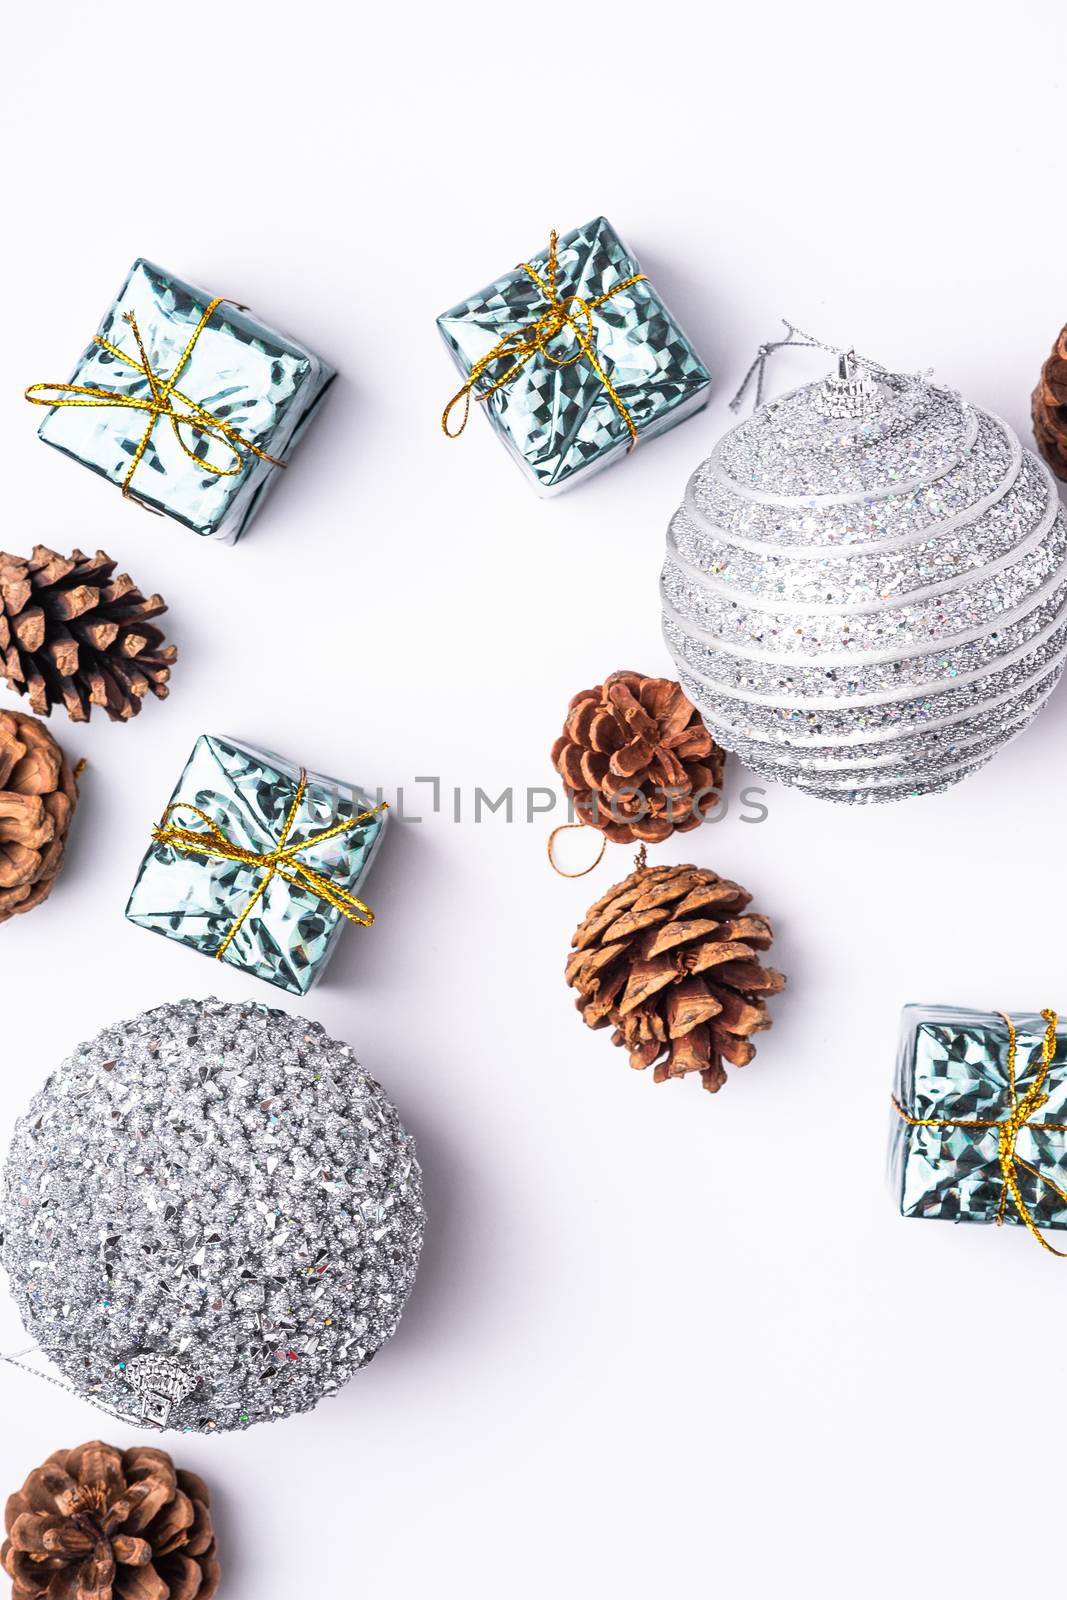 Christmas New Year composition. Gifts, fir tree cones, silver ball decorations on white background. Winter holidays concept. Flat lay, top view